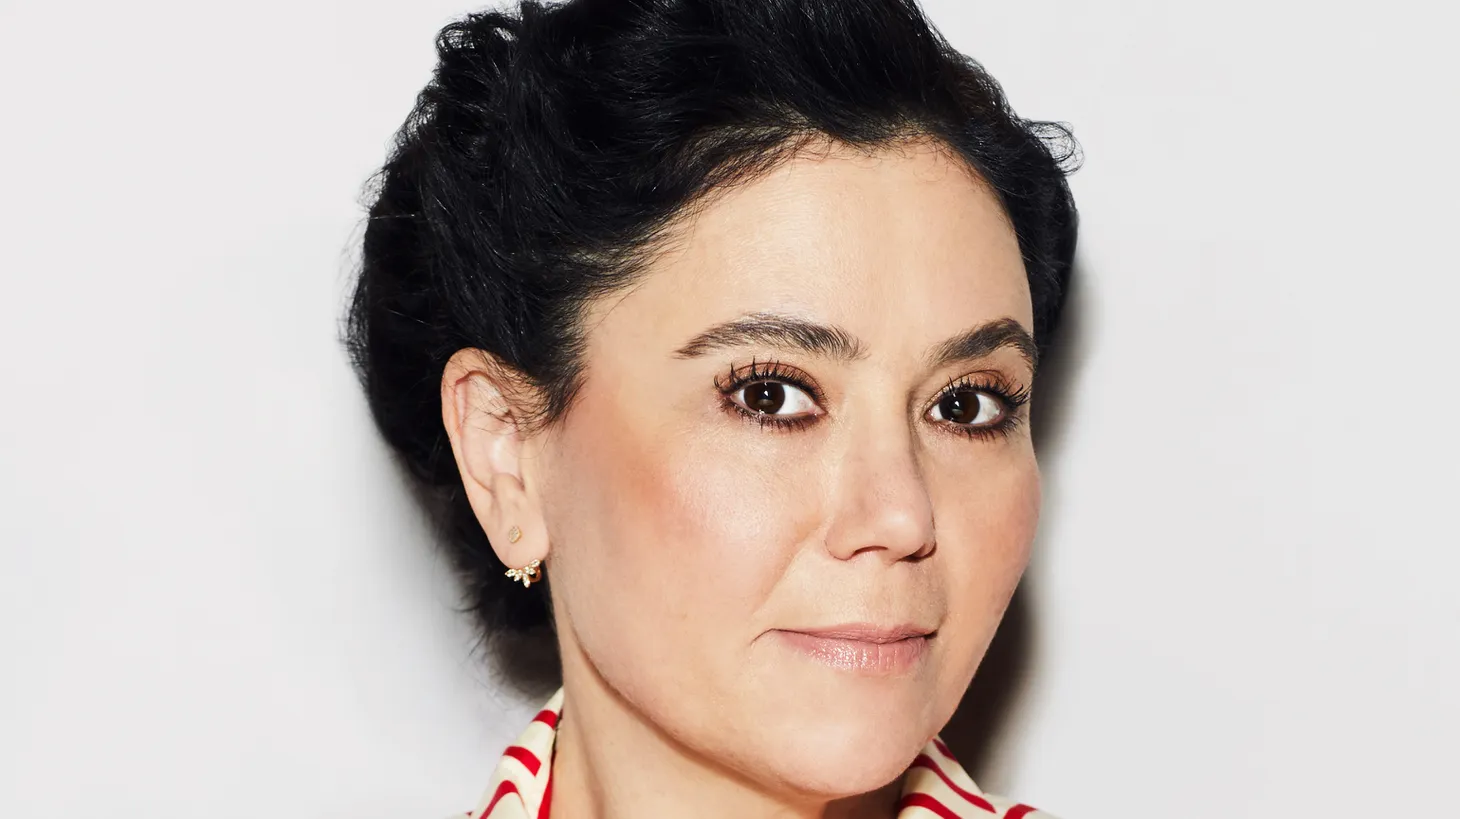 Actress Alex Borstein explains how Gordi’s music has been essential to her latest project.